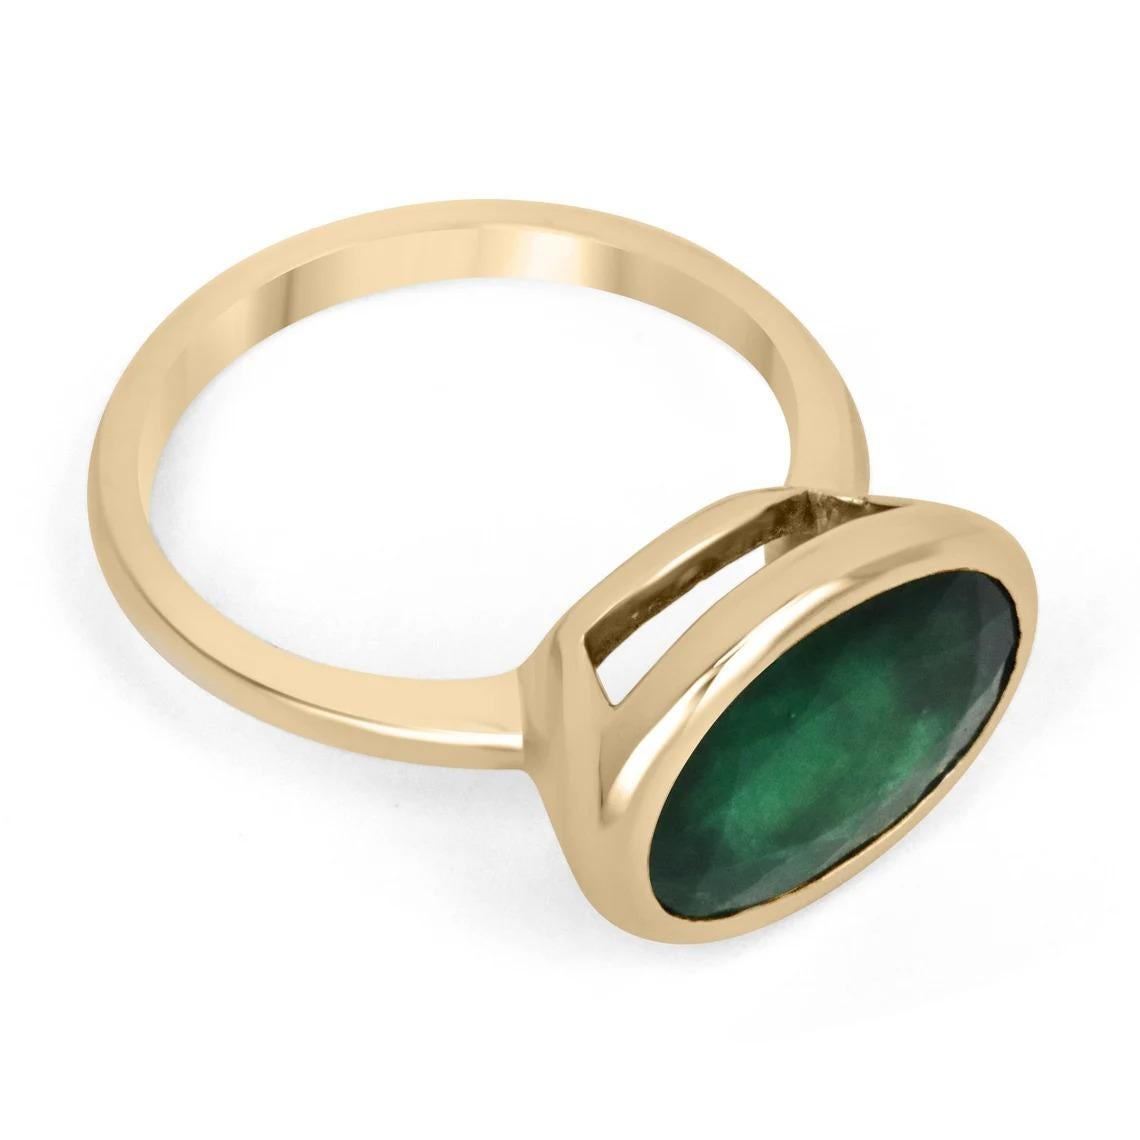 Displayed is a dark forest green emerald, solitaire, oval cut bezel ring in 14K yellow gold. This gorgeous solitaire ring carries a full 4.75-carat emerald in a sleek bezel setting. The emerald has good clarity and luster. This emerald has a great